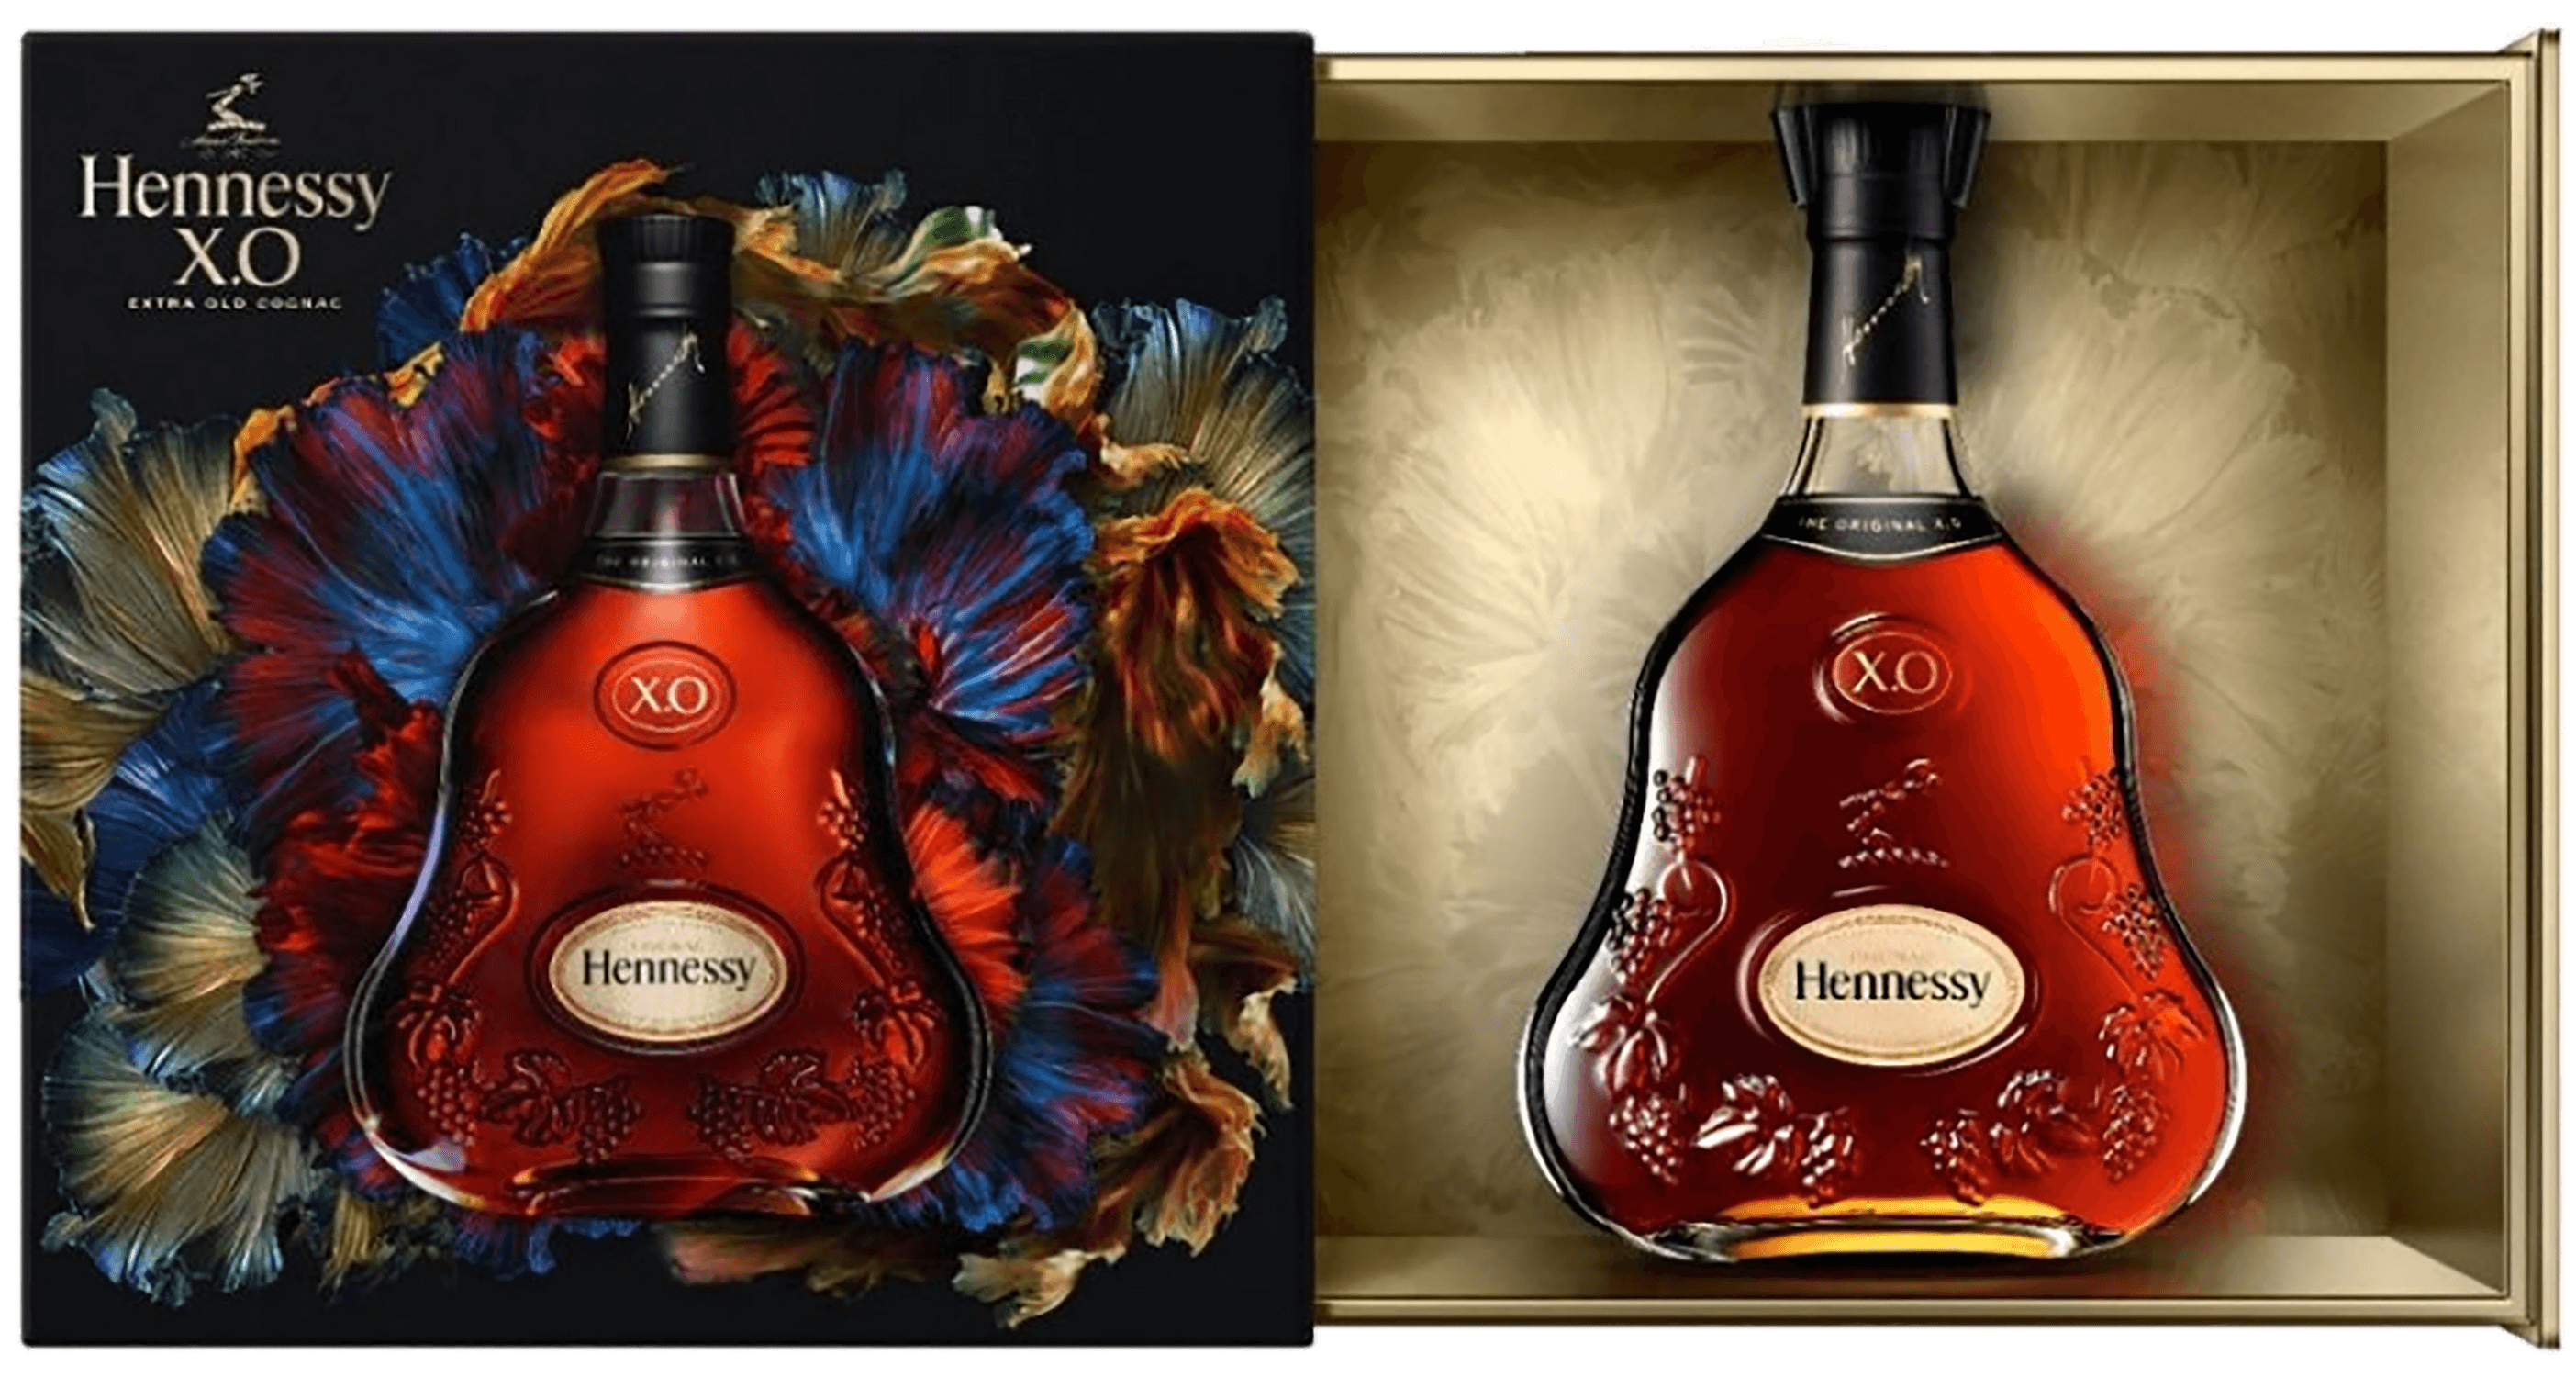 Hennessy Cognac XO (gift box) hennessy cognac vs gift box with 2 glasses